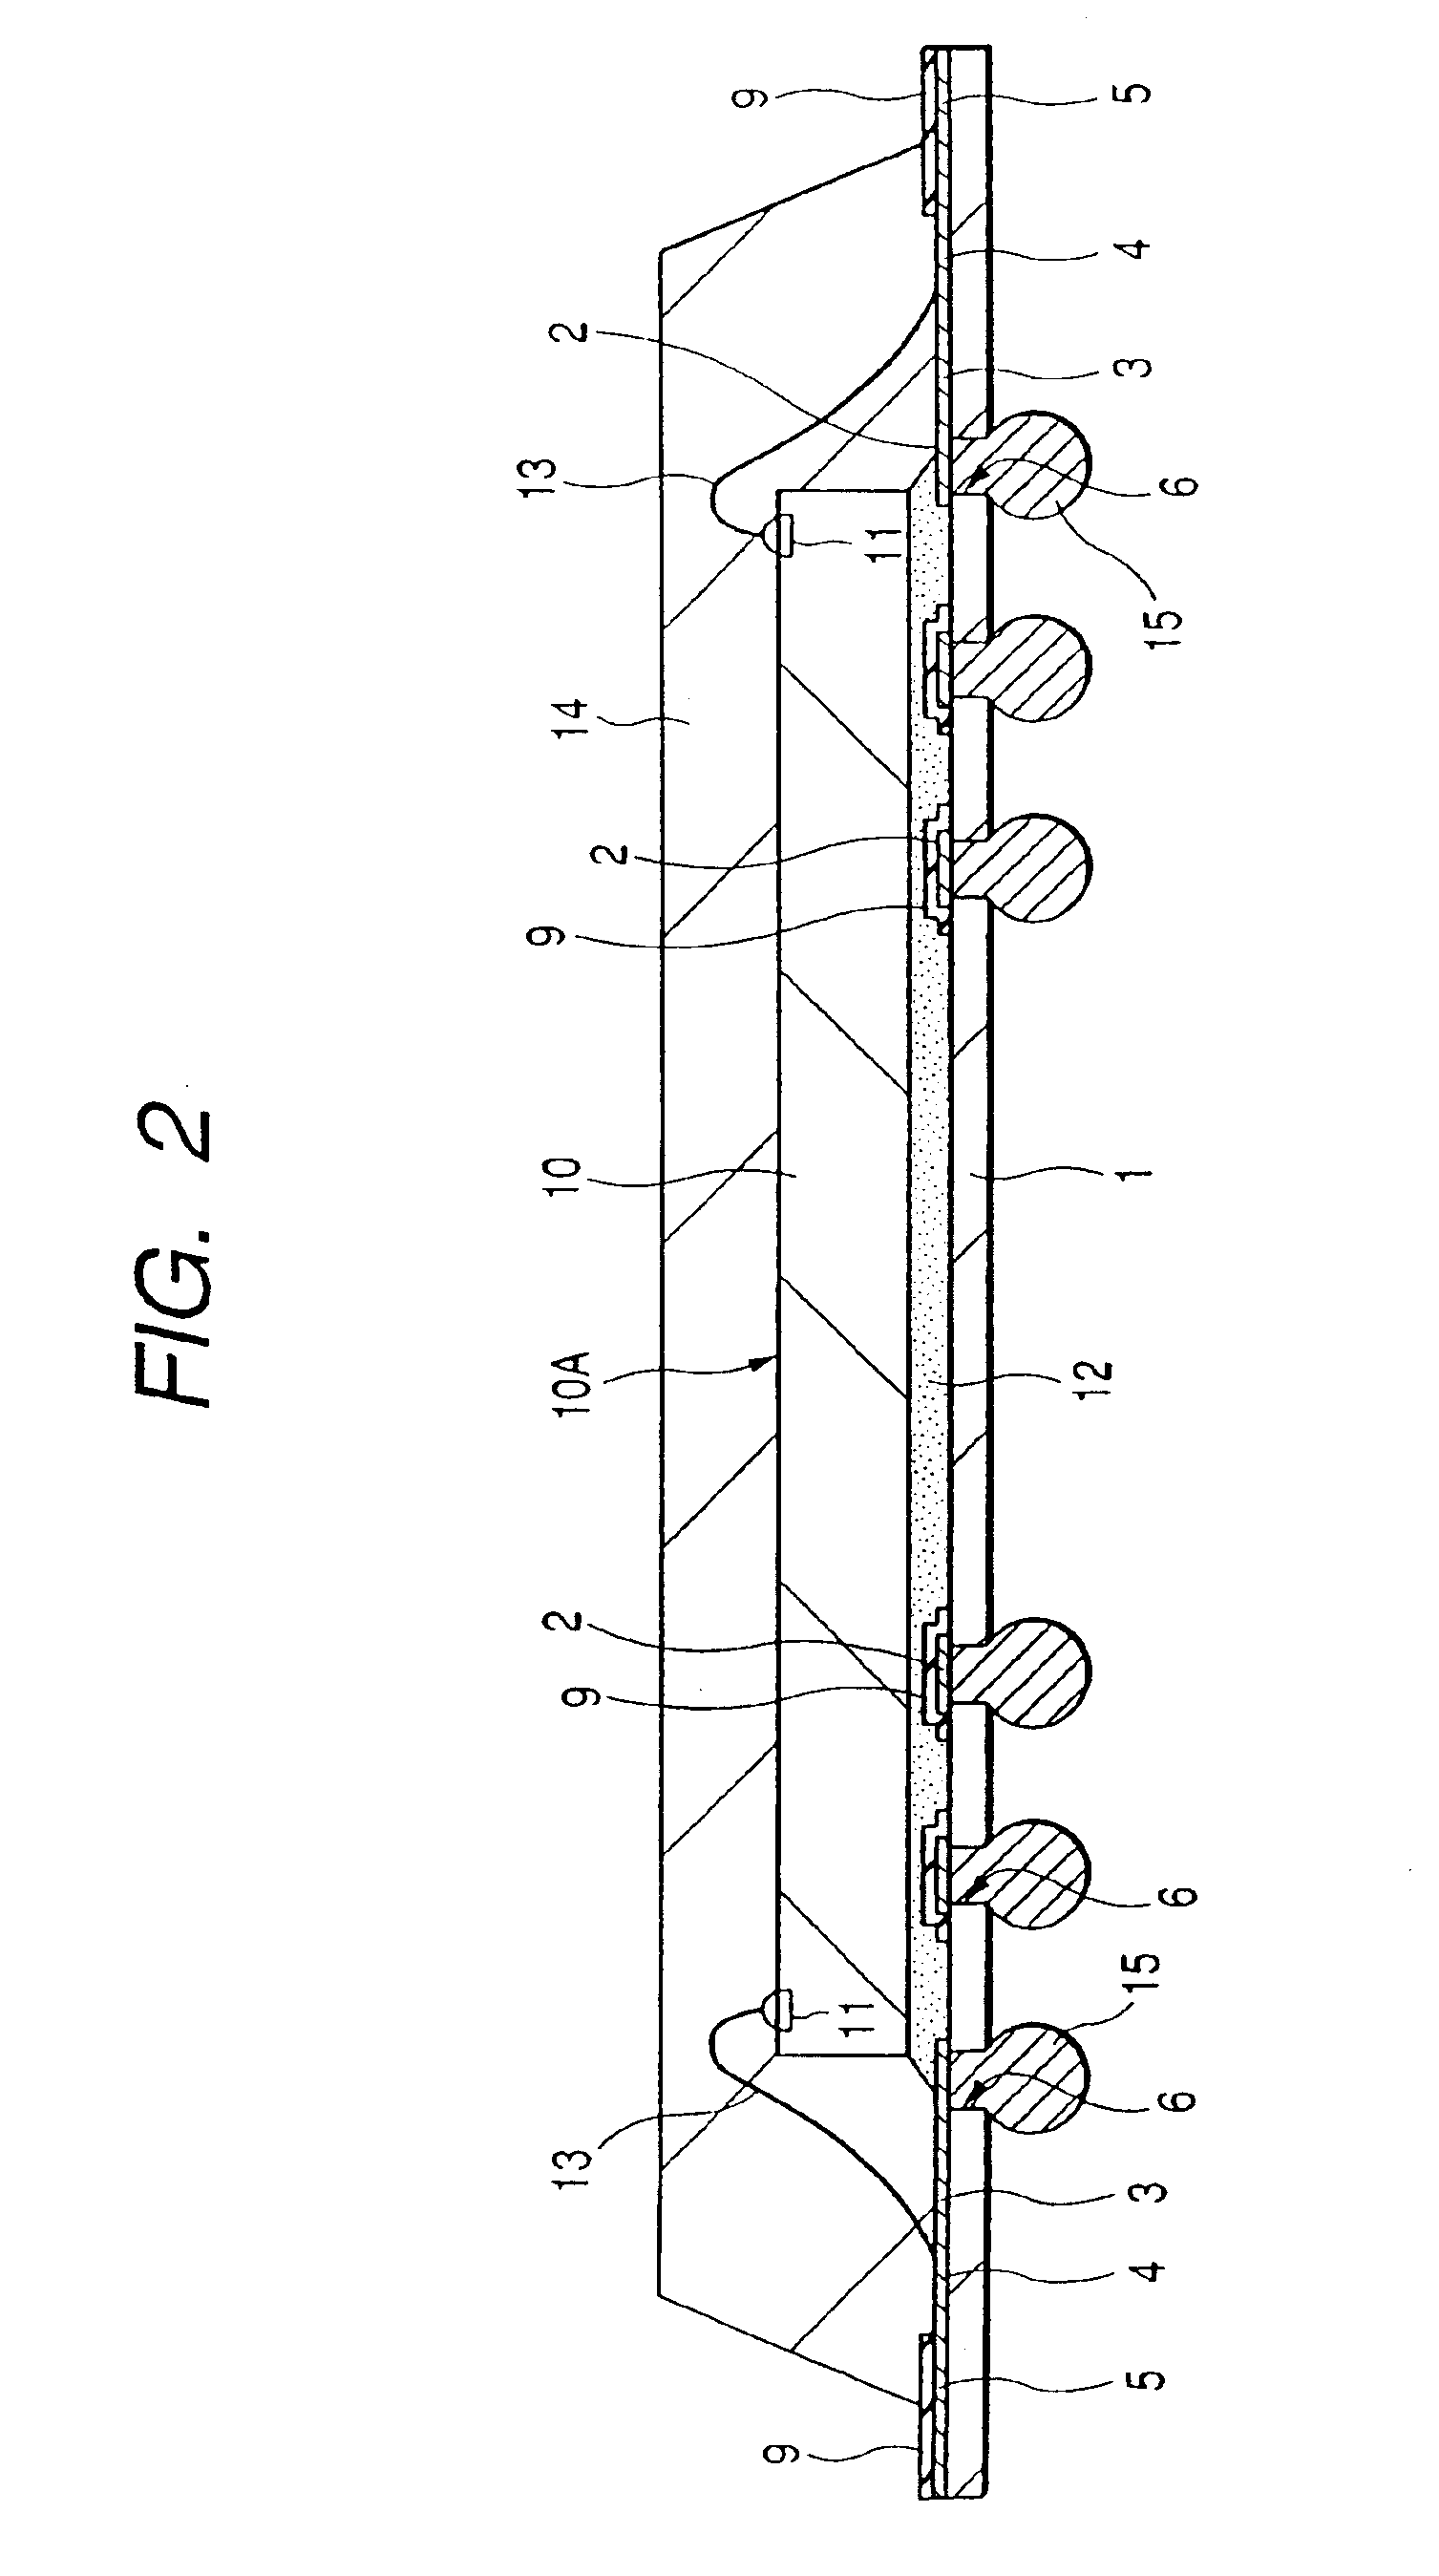 Method of manufacturing semiconductor package including forming a resin sealing member